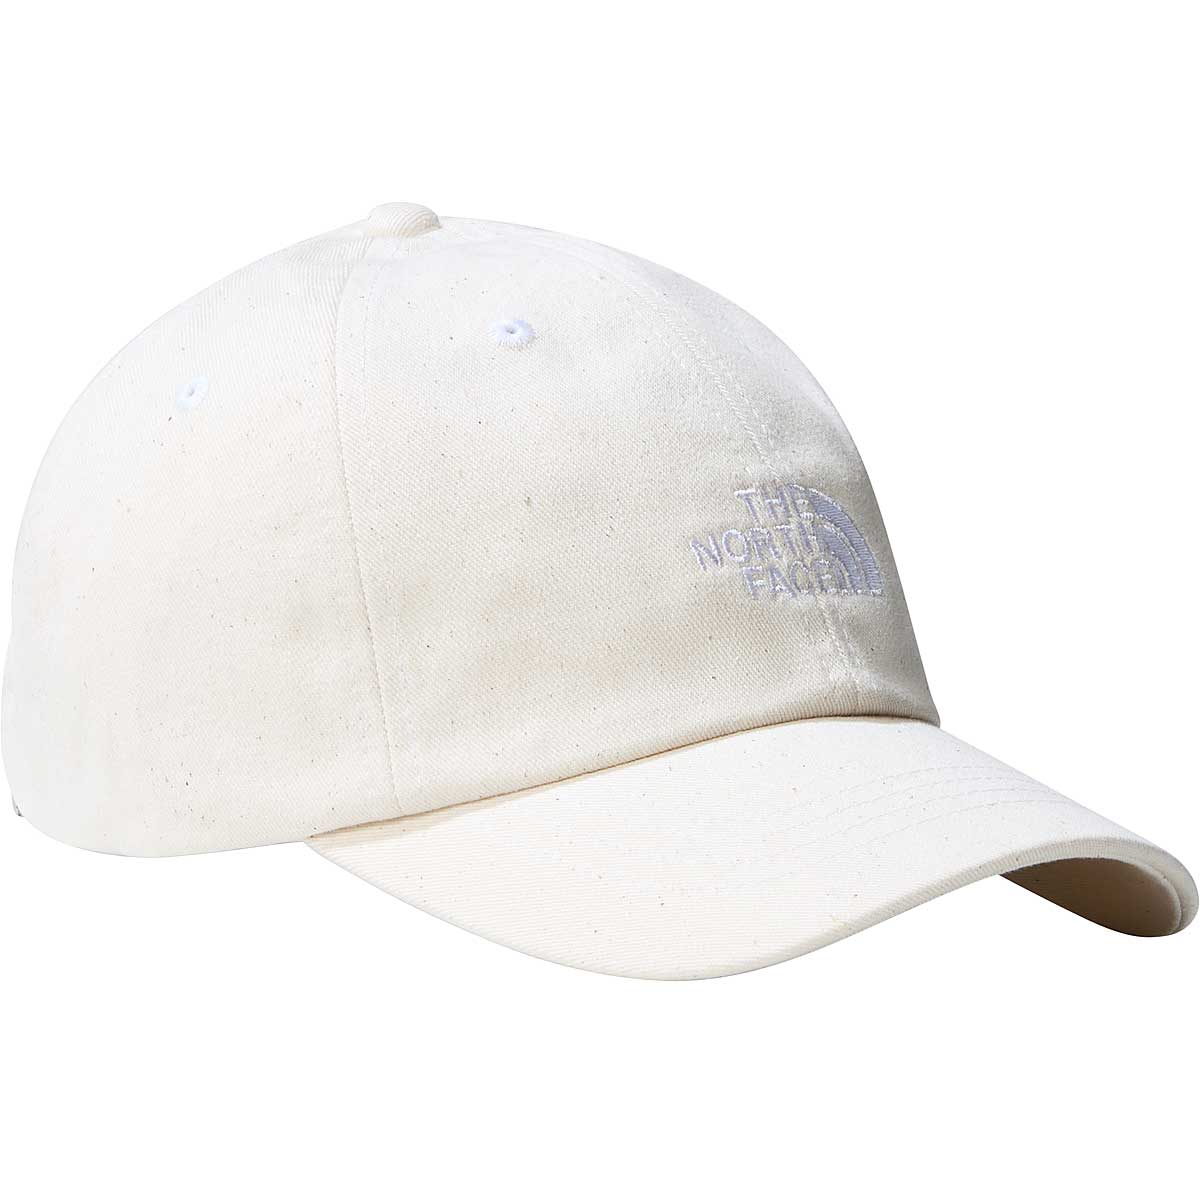 Image of The North Face Norm Hat, White/multicolored